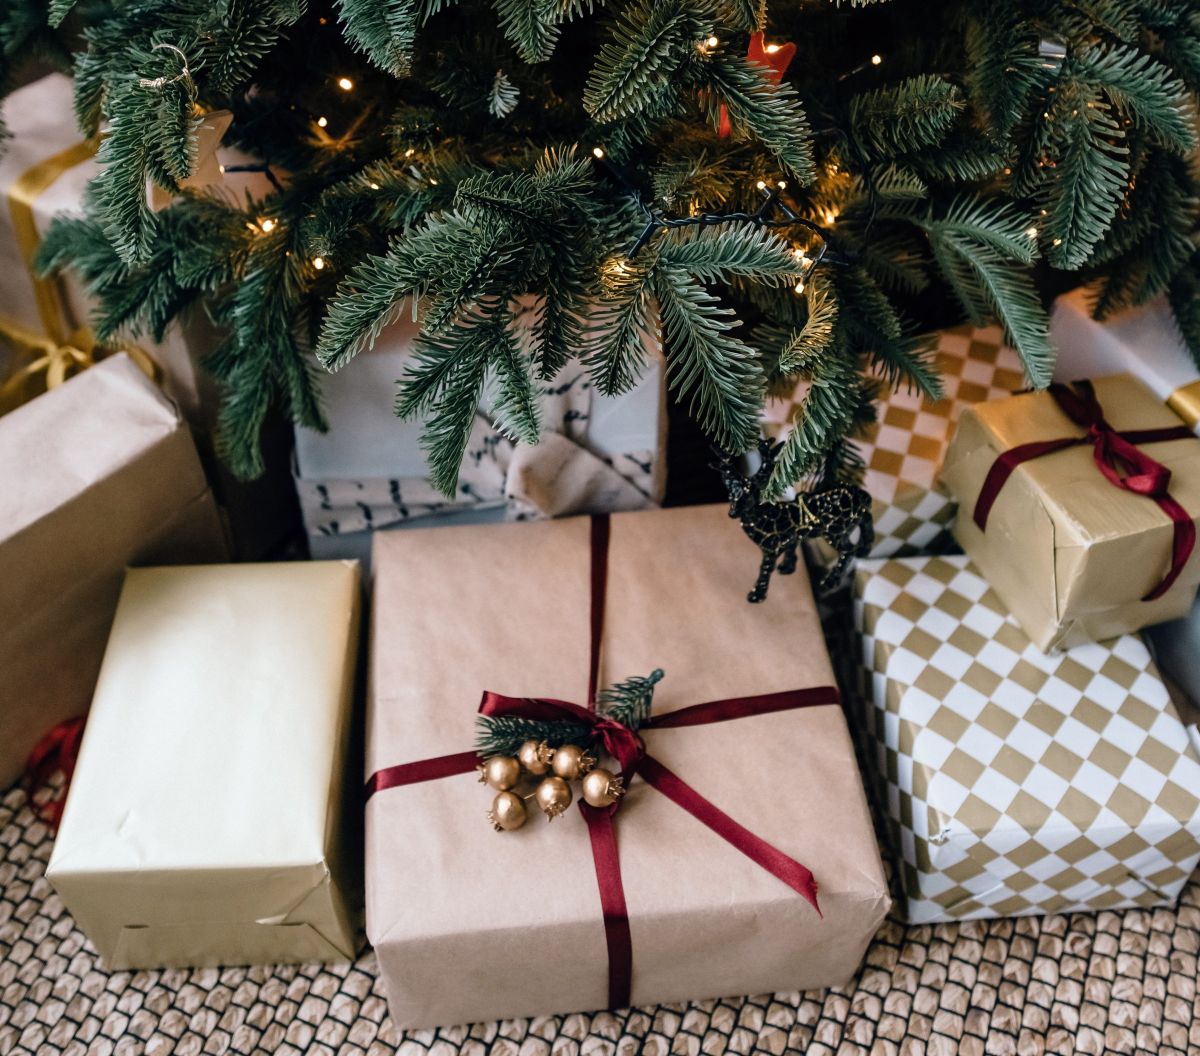 Why is it too late to order your Christmas gifts online? | The State